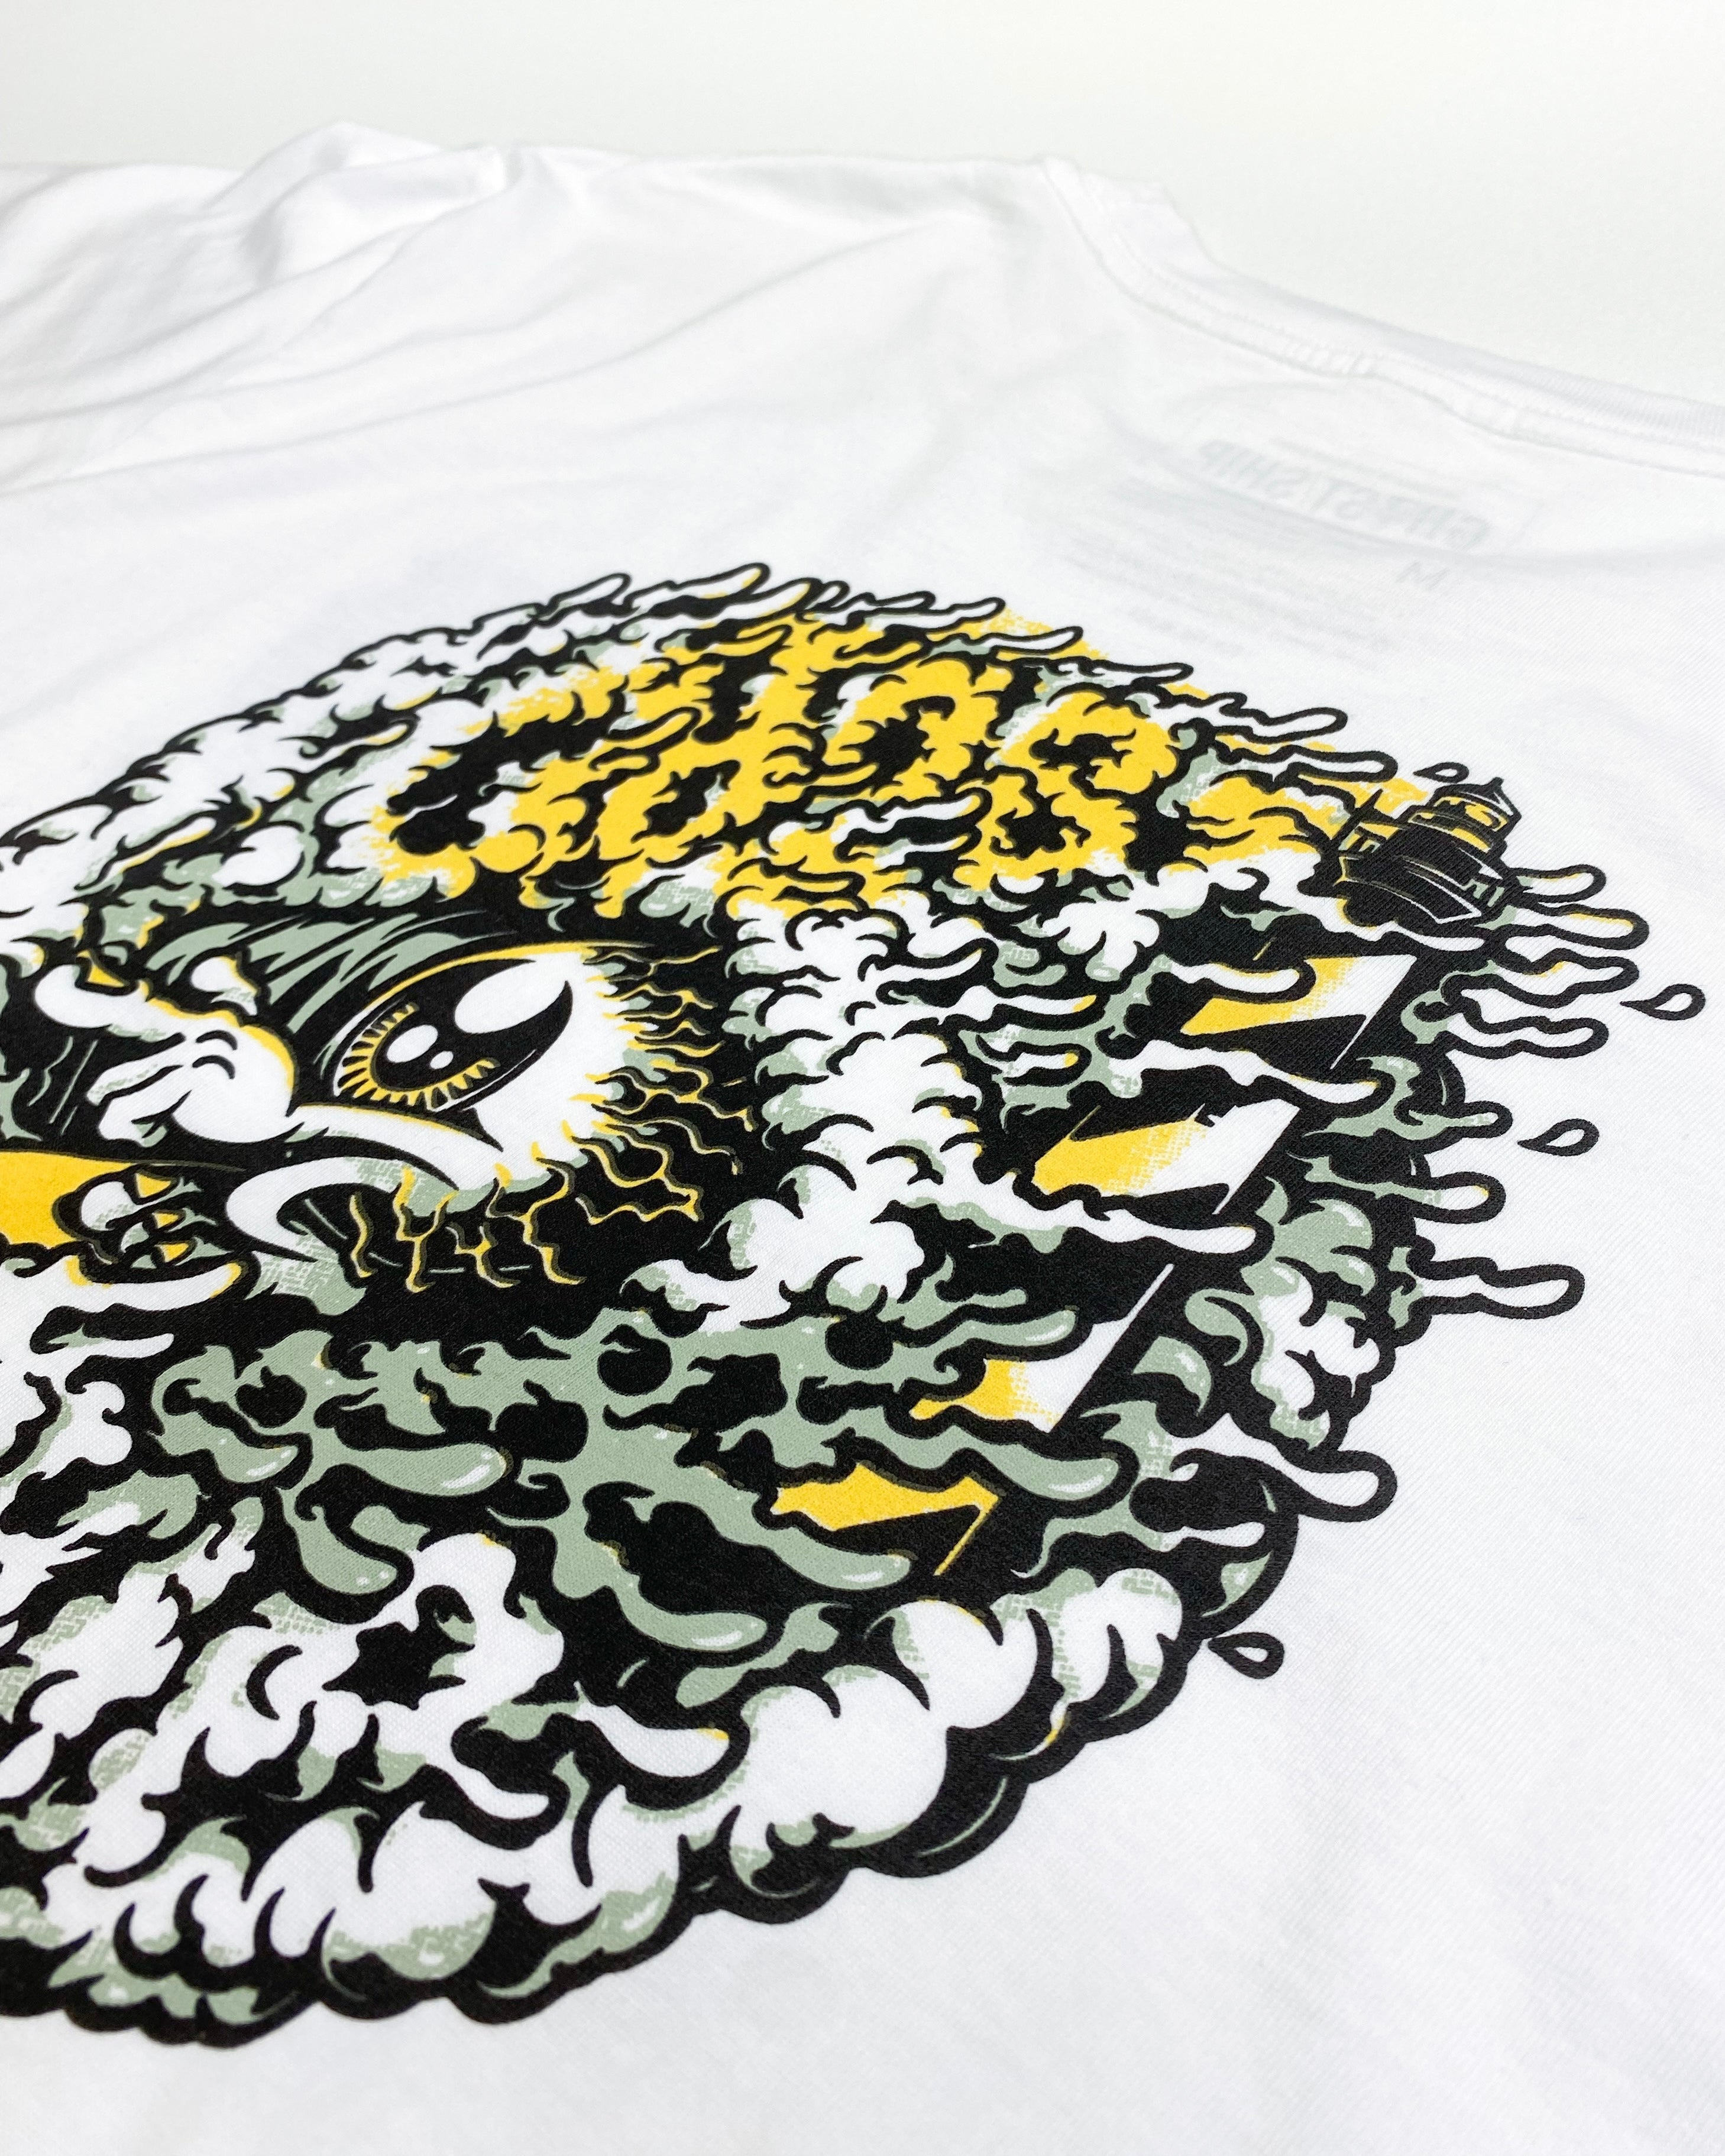 Eye Of The Storm White Tee - GHOSTSHIP.Supply